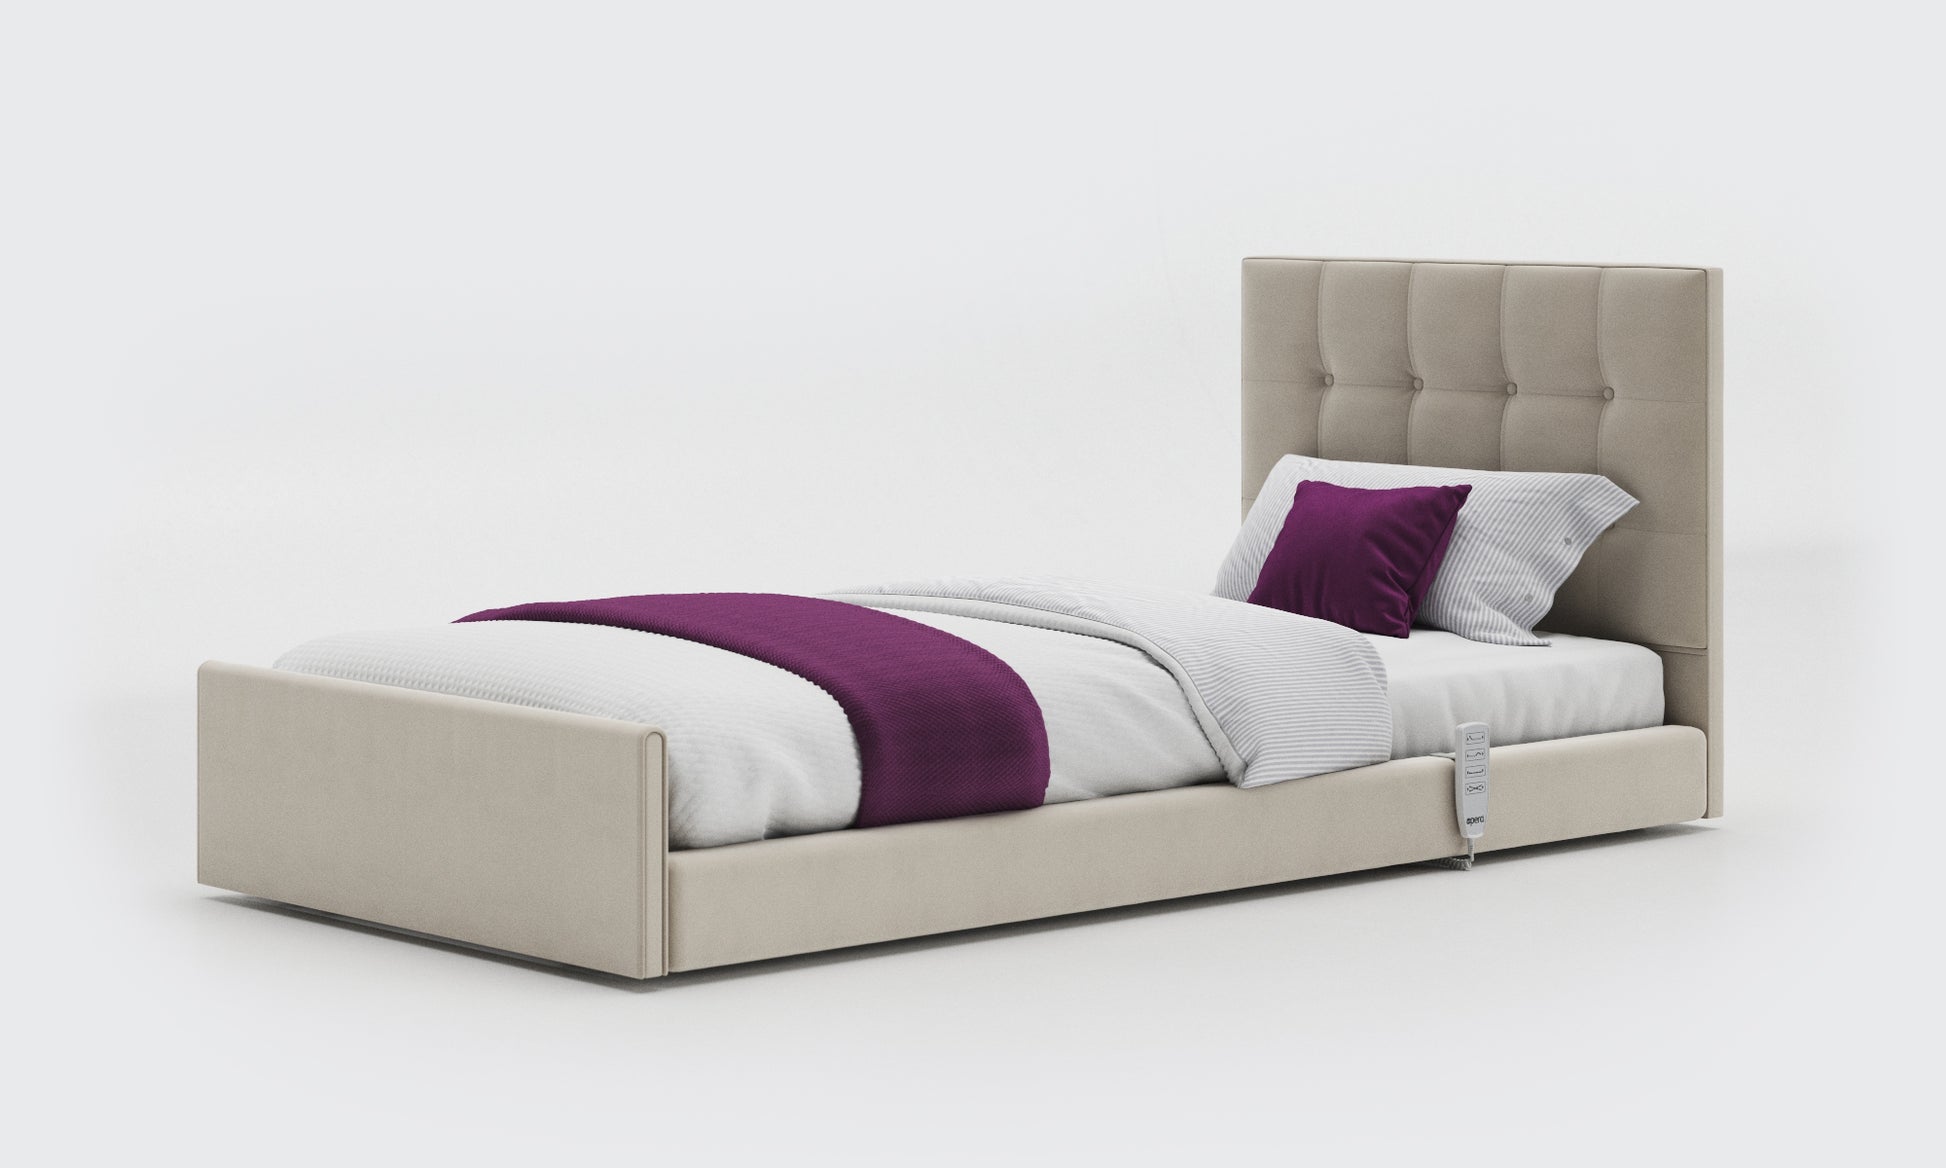 solo comfort bed 3ft with an emerald headboard in sisal leather